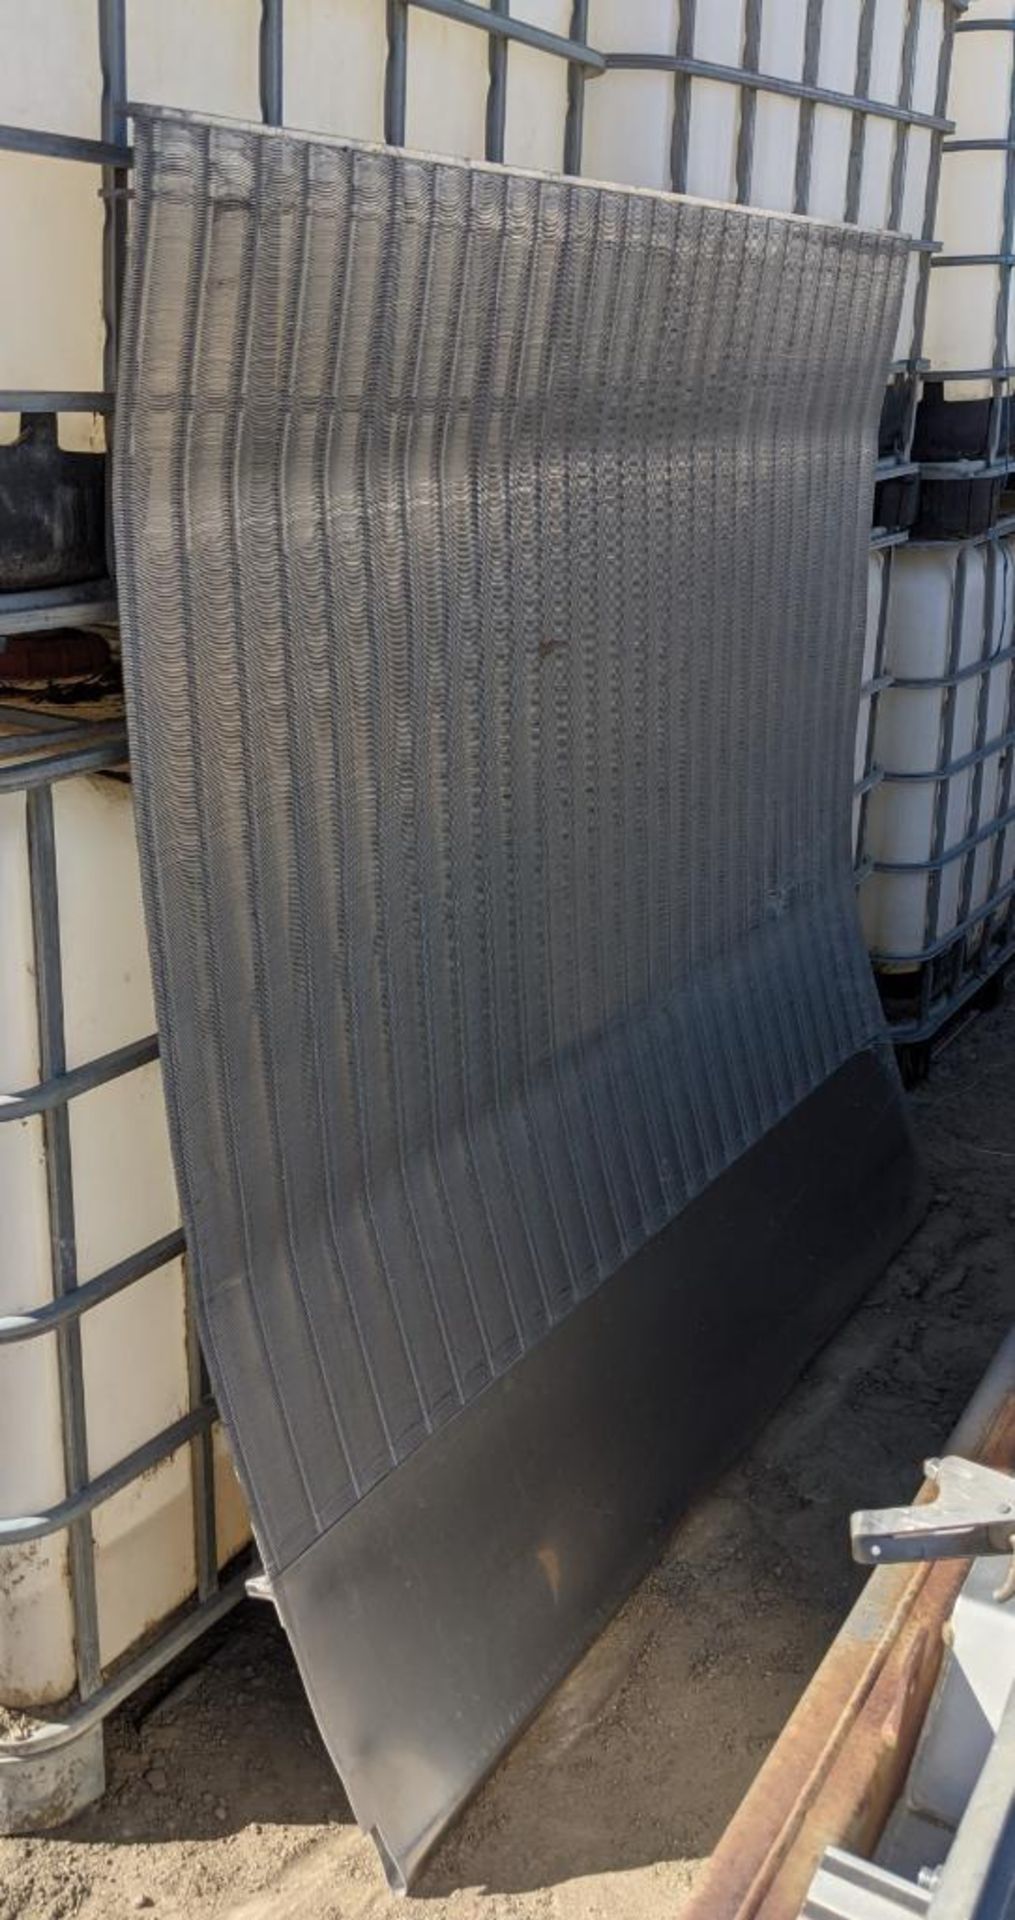 wedge wire parabolic screen stainless steel - Image 5 of 11